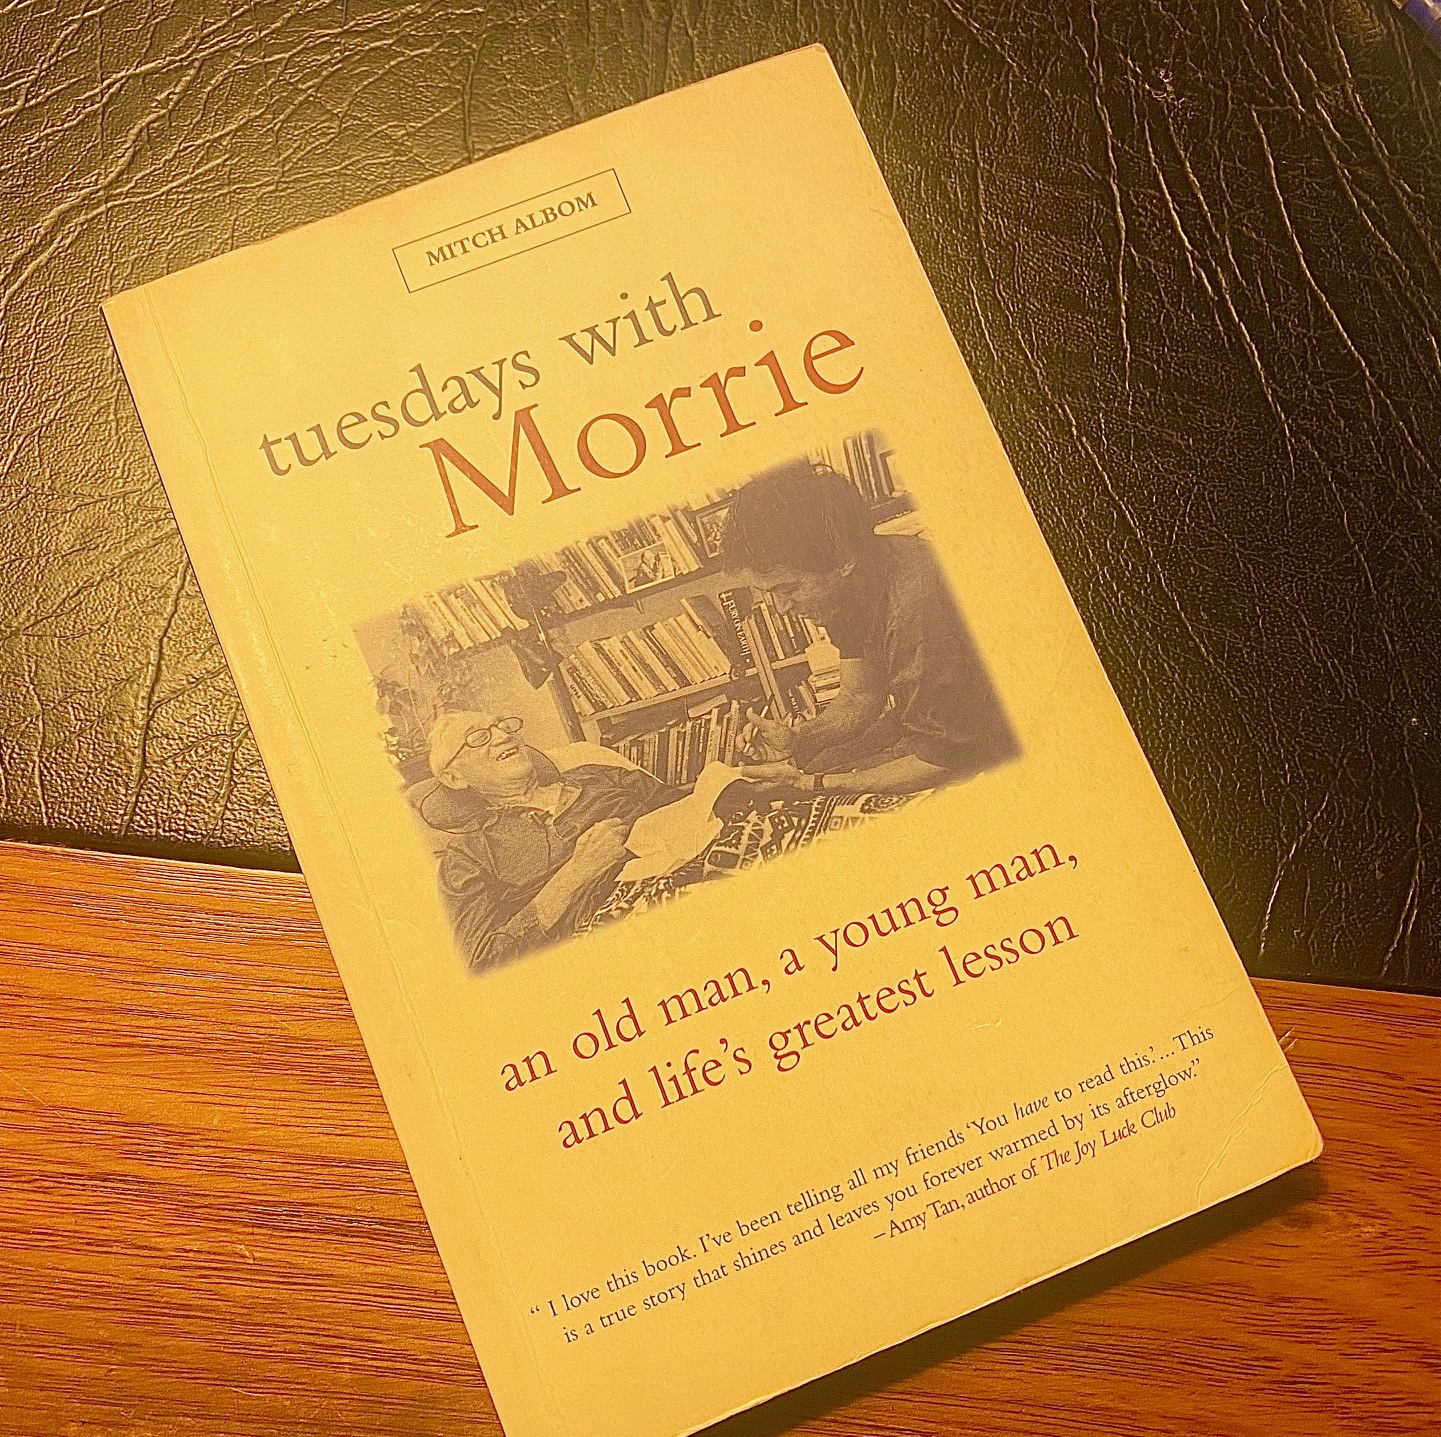 tuesdays with morrie, mitch albom